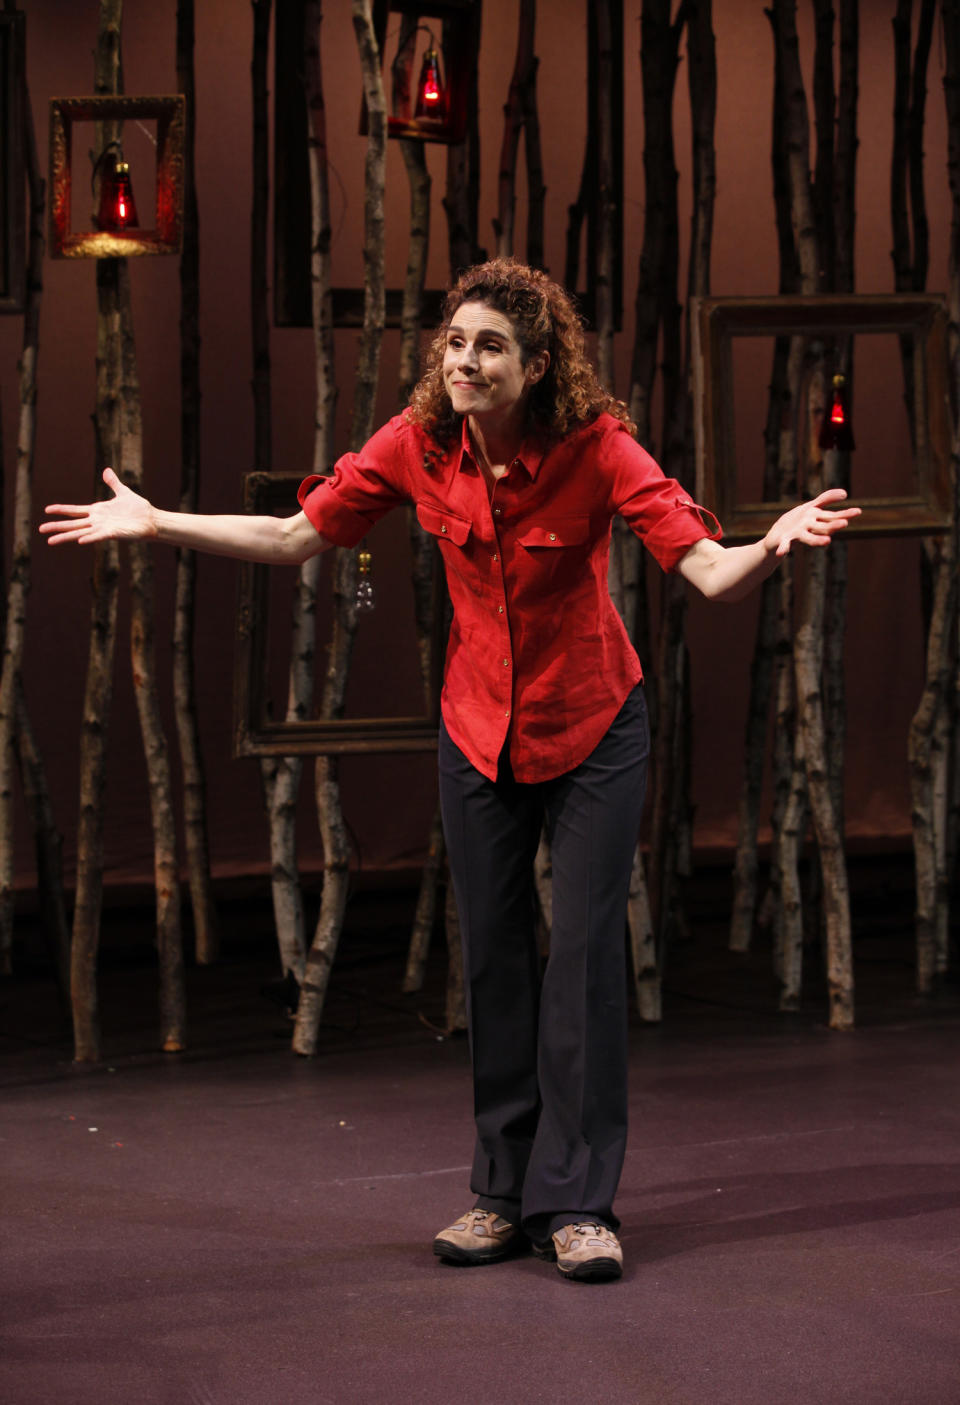 This undated theater image released by Karen Greco Public Relations shows Dulcy Rogers during a performance of "I am a Tree," at the Theatre at St. Clement's in New York. (AP Photo/Karen Greco Public Relations, Carol Rosegg)